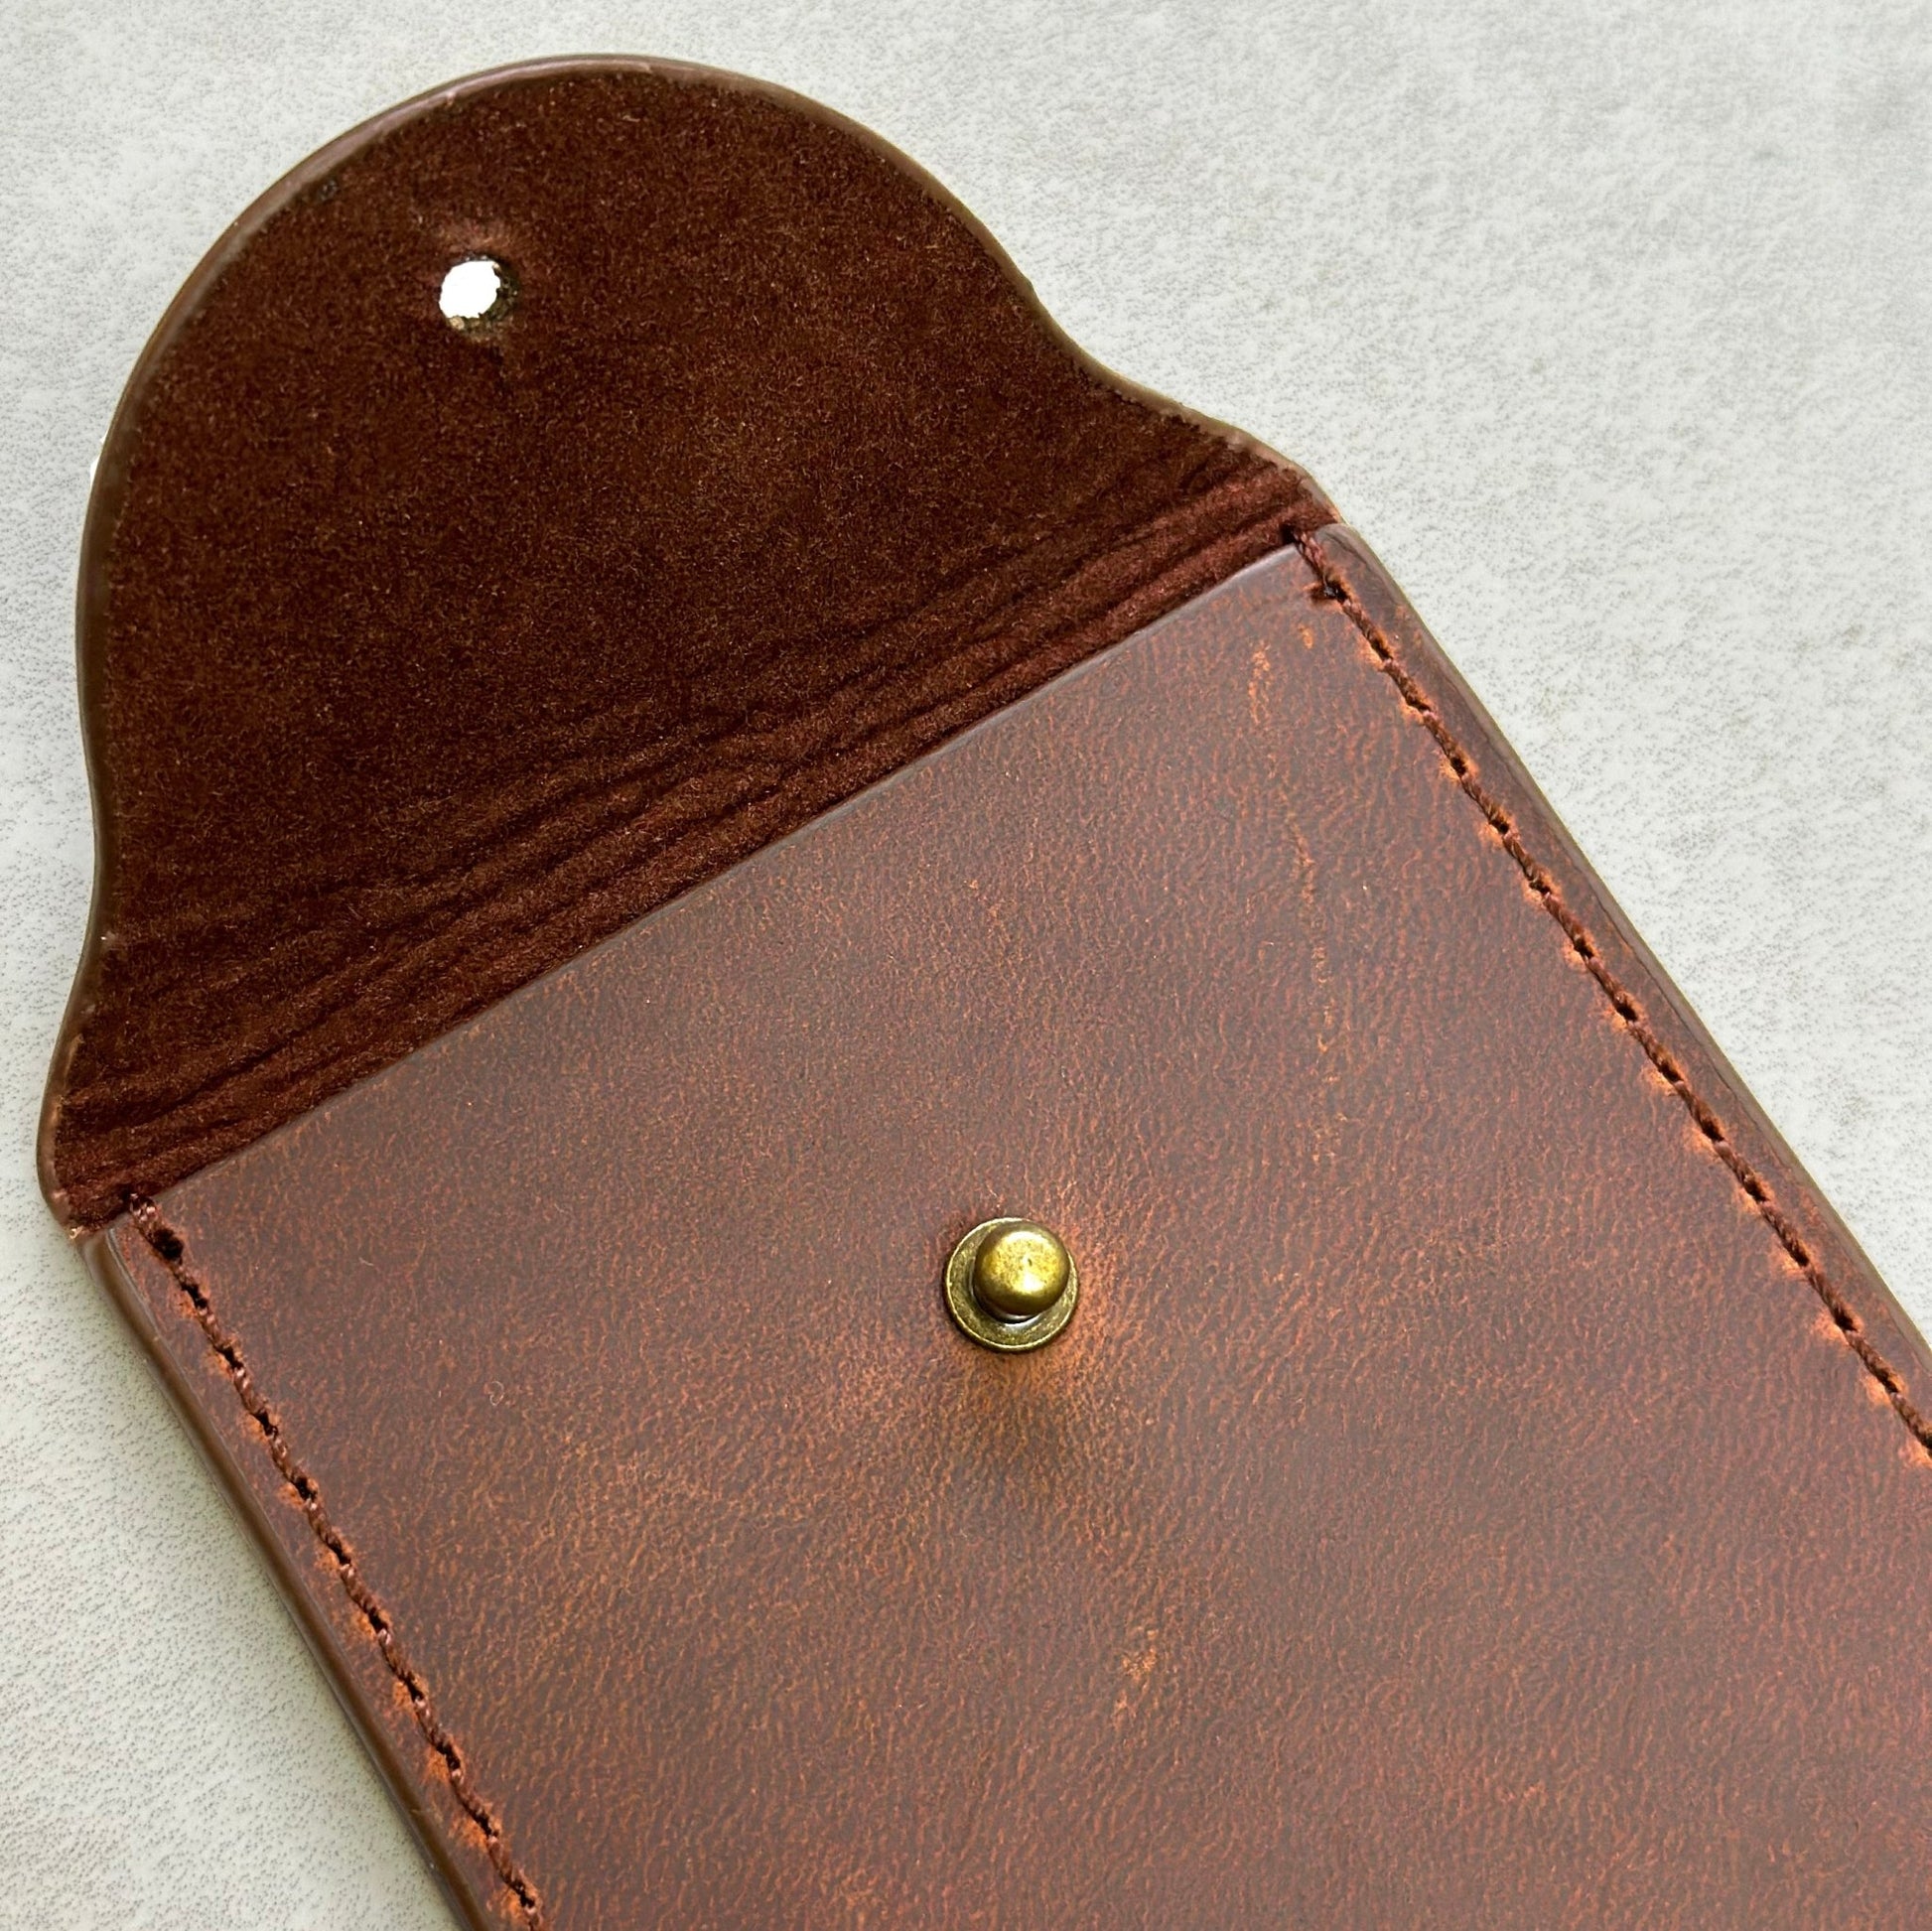 Dallas brown full grain horse leather watch case with microfibre lining. Watch And Strap.